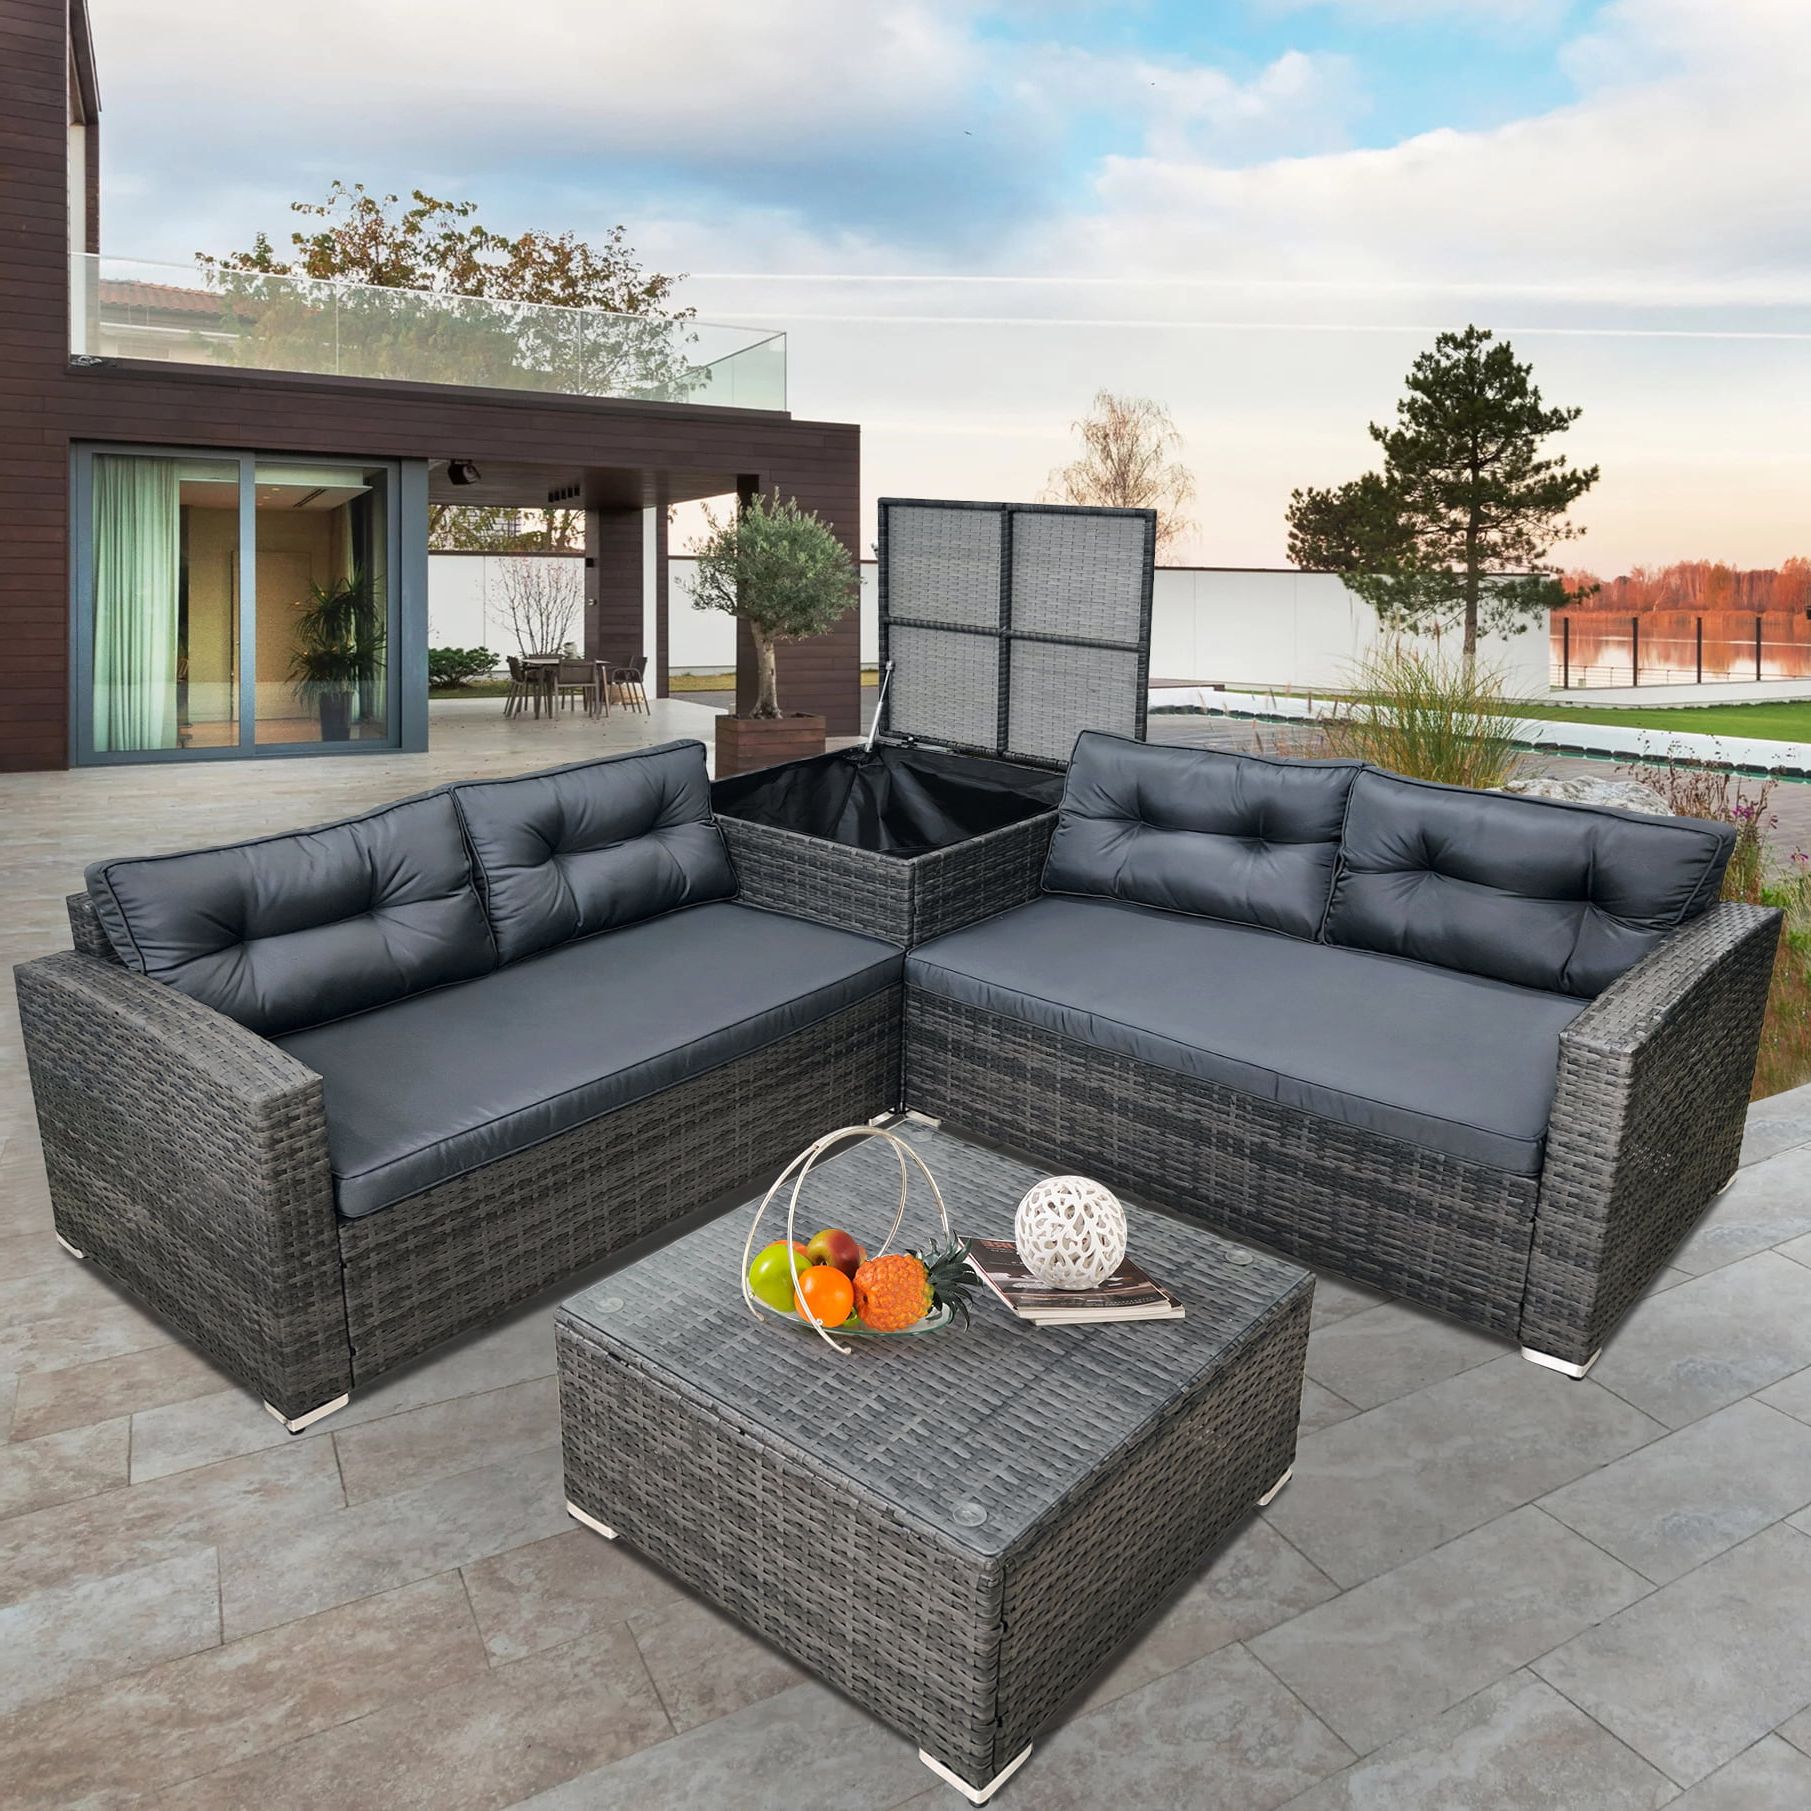 Famous Rattan Wicker Patio Furniture, 4 Piece Outdoor Conversation Set With Storage  Ottoman, All Weather Sectional Sofa Set With Gray Cushions And Table For  Backyard, Porch, Garden, Poolside,l4537 – Walmart Regarding Storage Table For Backyard, Garden, Porch (Photo 9 of 15)